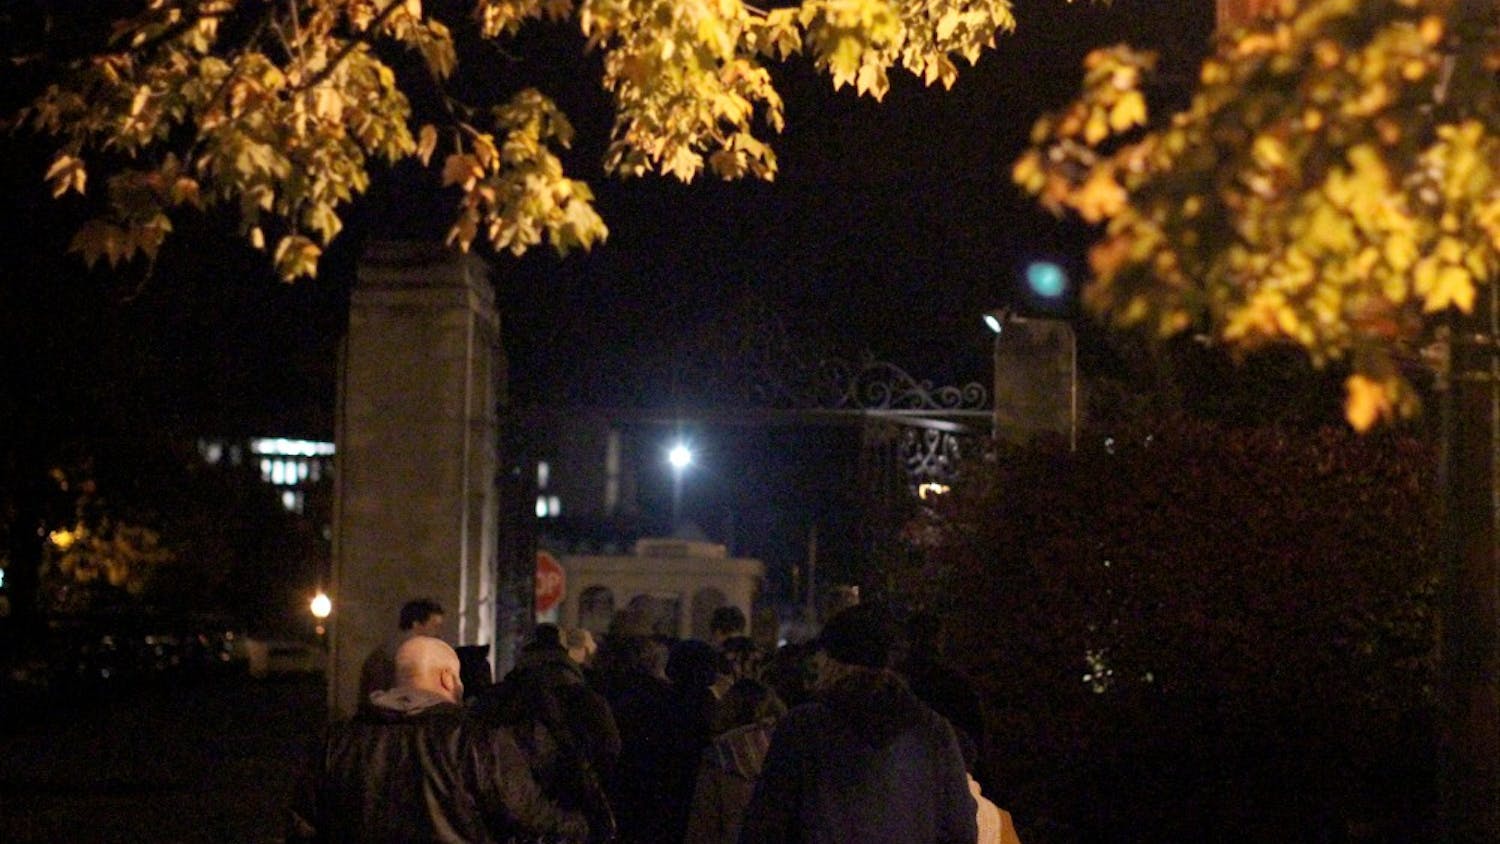 The ghost walkers ended their tour at Showalter Fountain. They covered spirits and different legends at the Indiana Memorial Union, Dunn cemetery and Owen Hall.